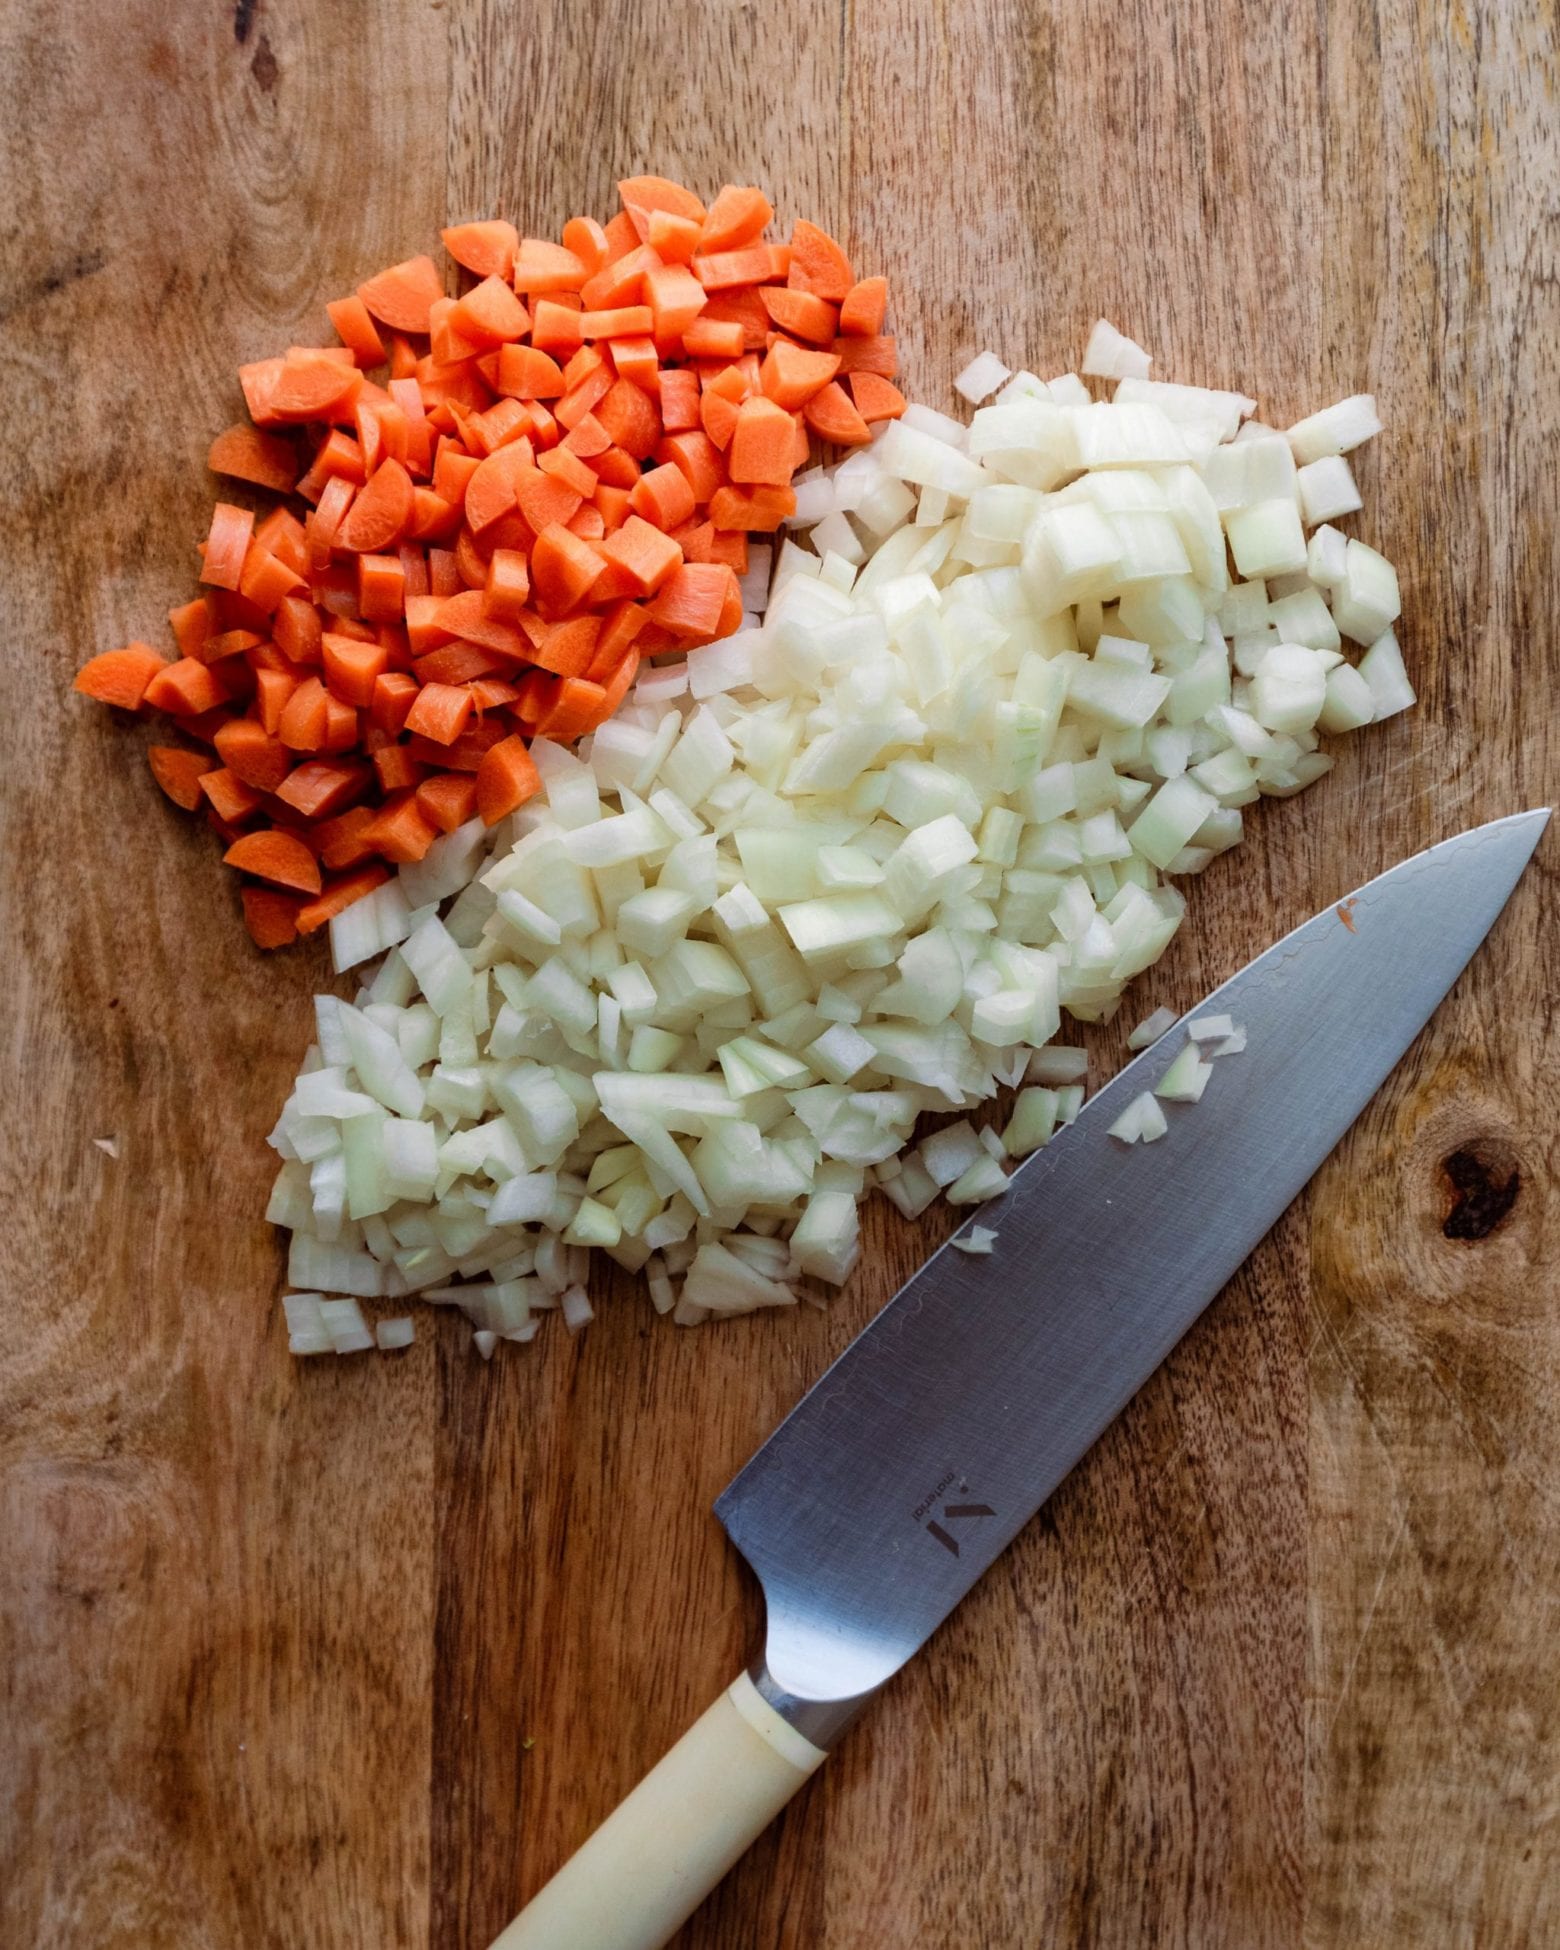 diced carrots and onions on wooden cutting board